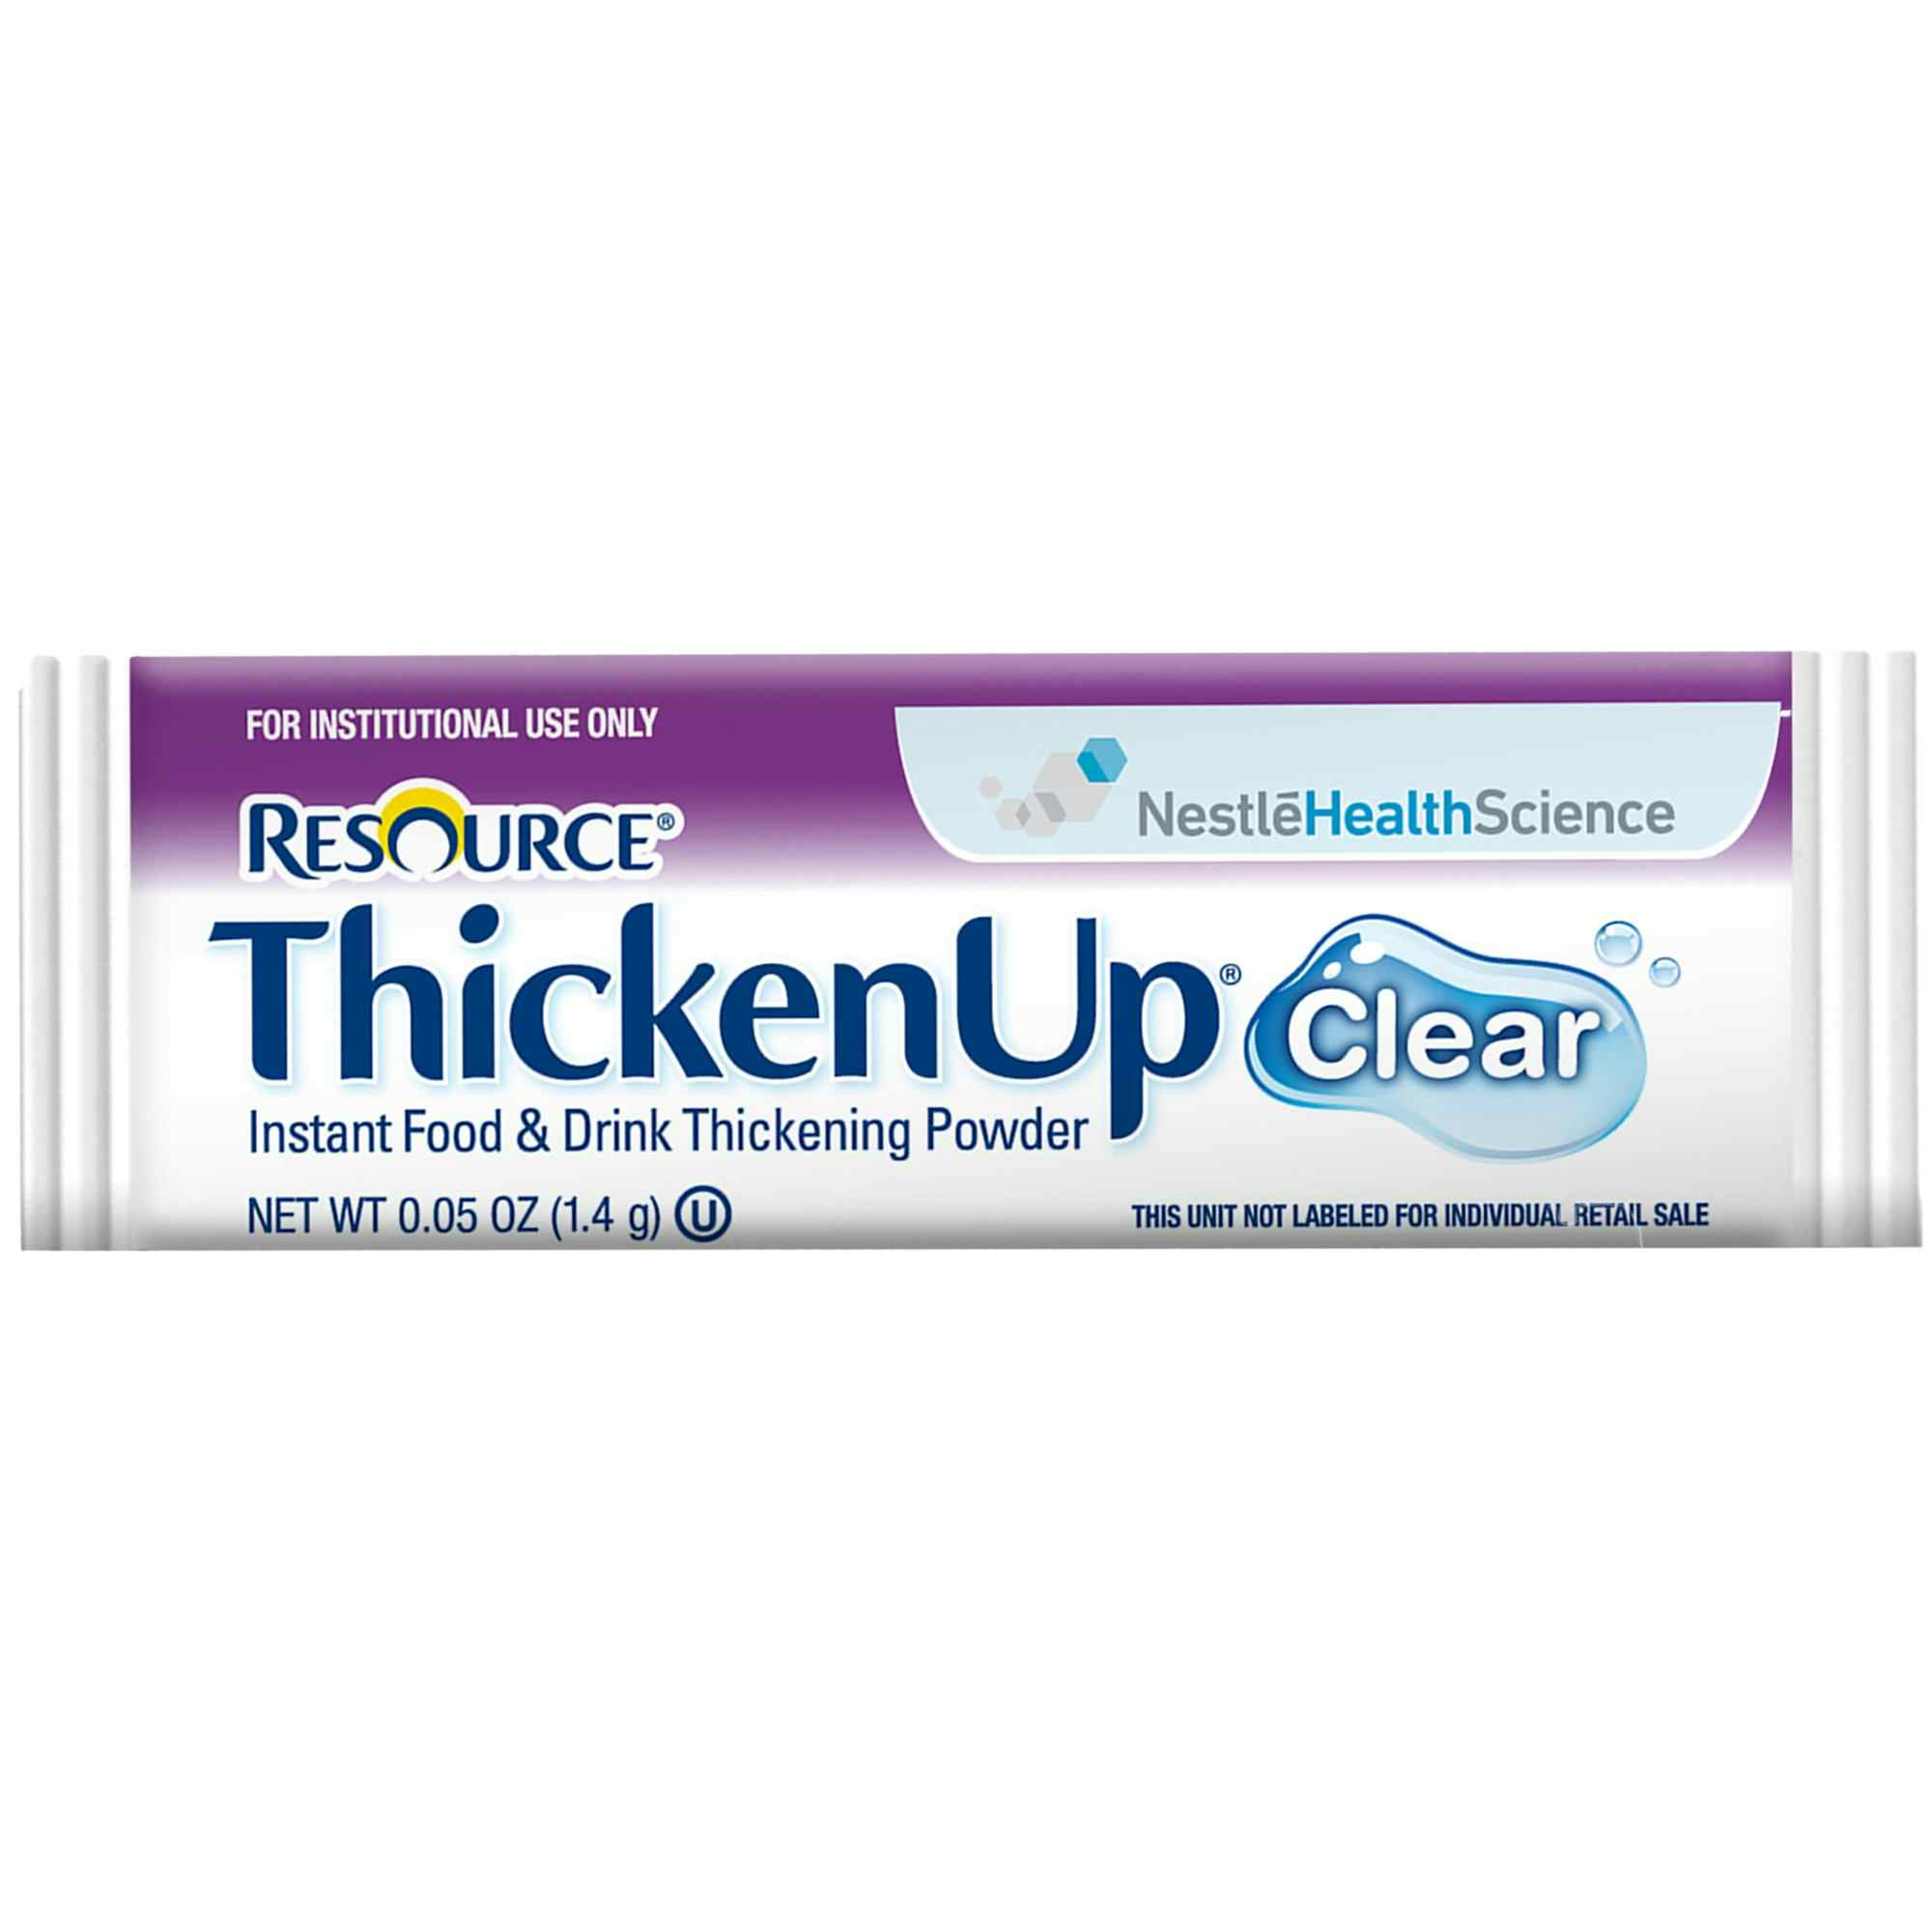 Resource Thickenup Clear Instant Food & Drink Thickening Powder, Packet